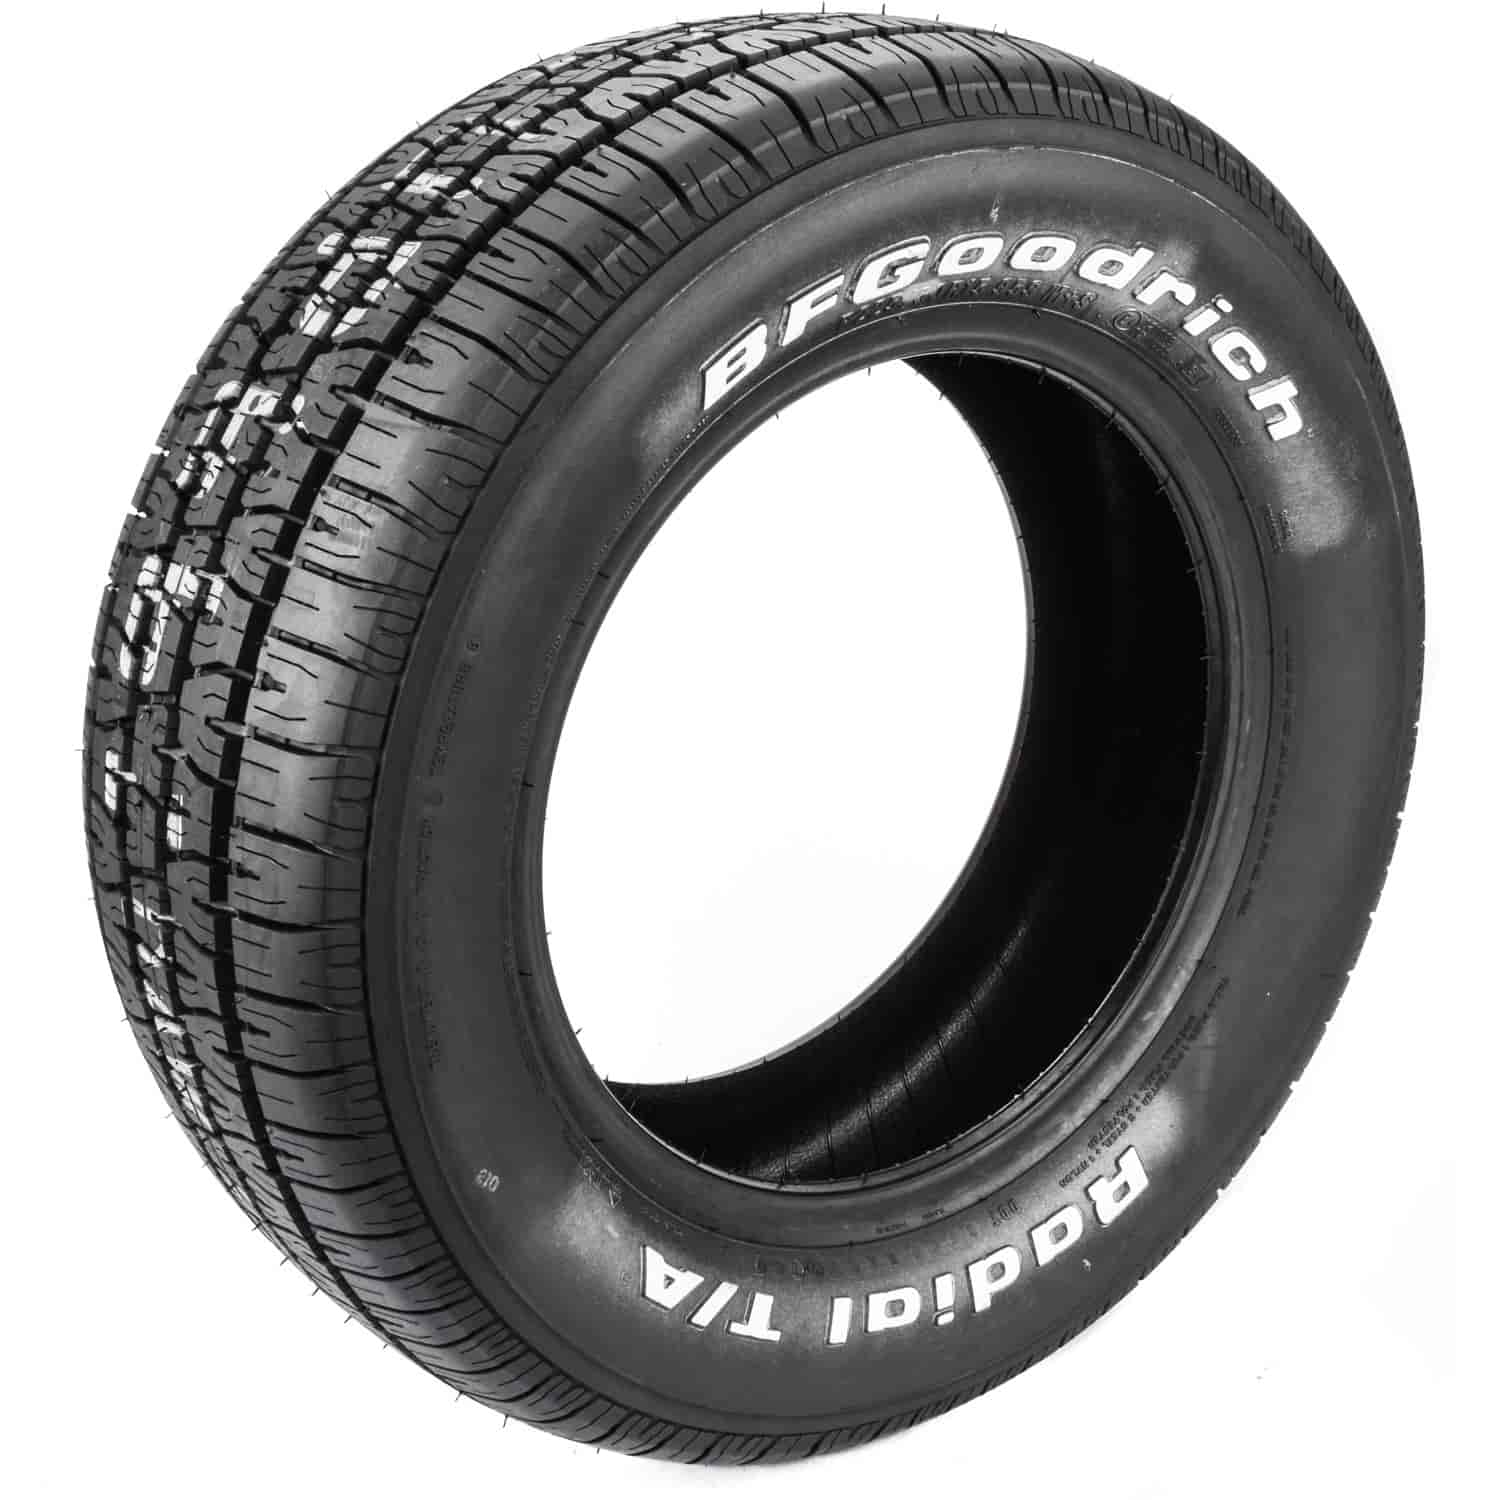 Radial T/A Tire P225/60SR15